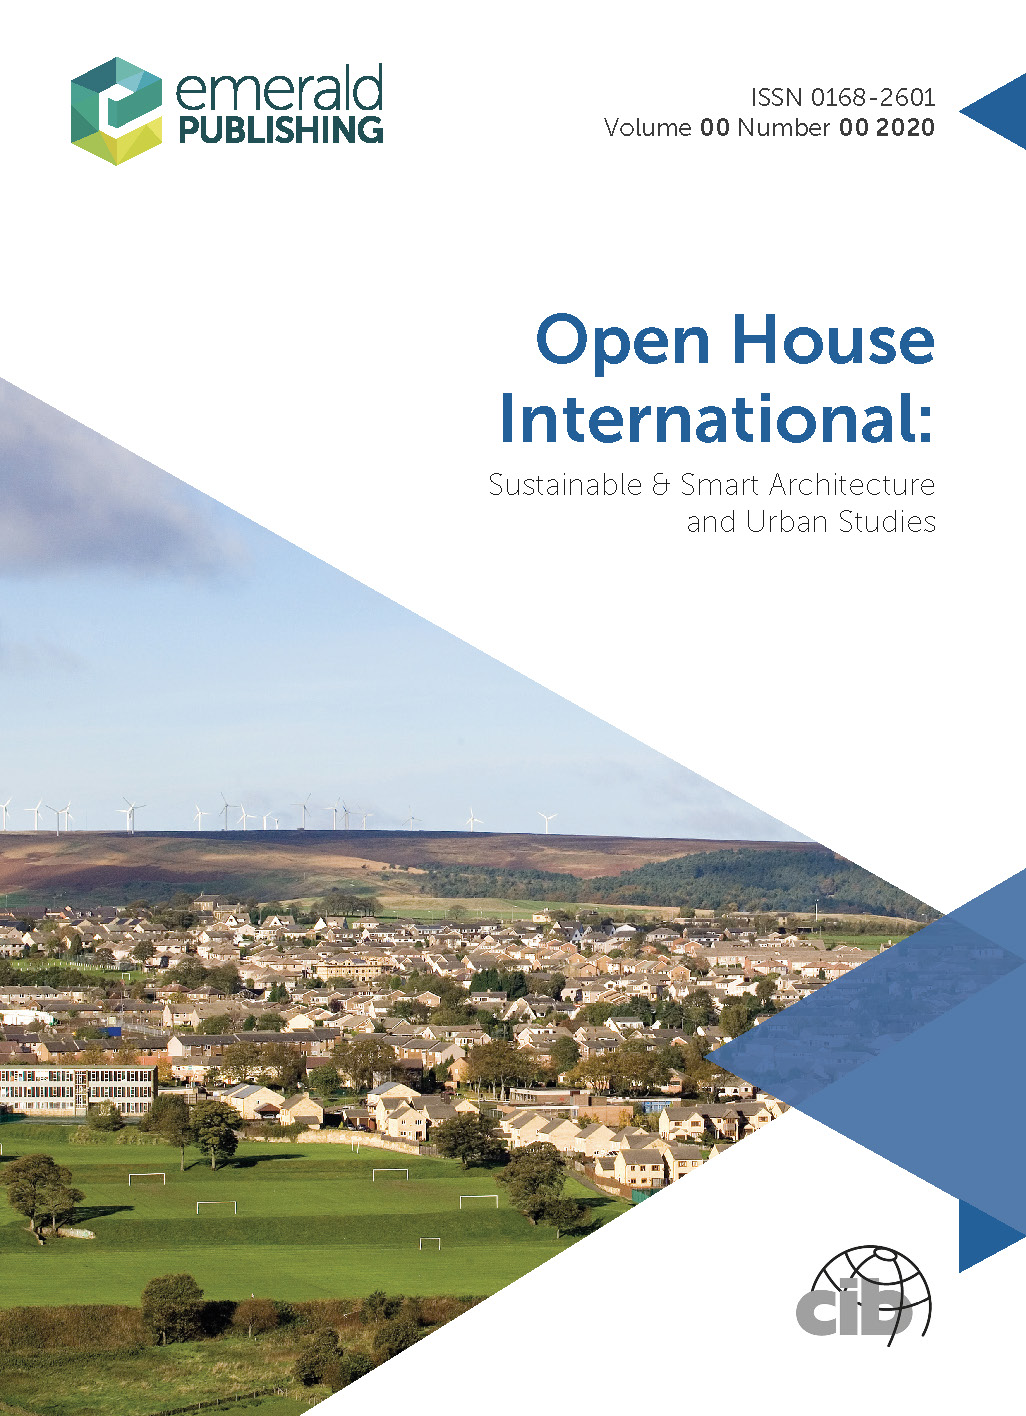 Open House International: Sustainable & Smart Architecture and Urban Studies